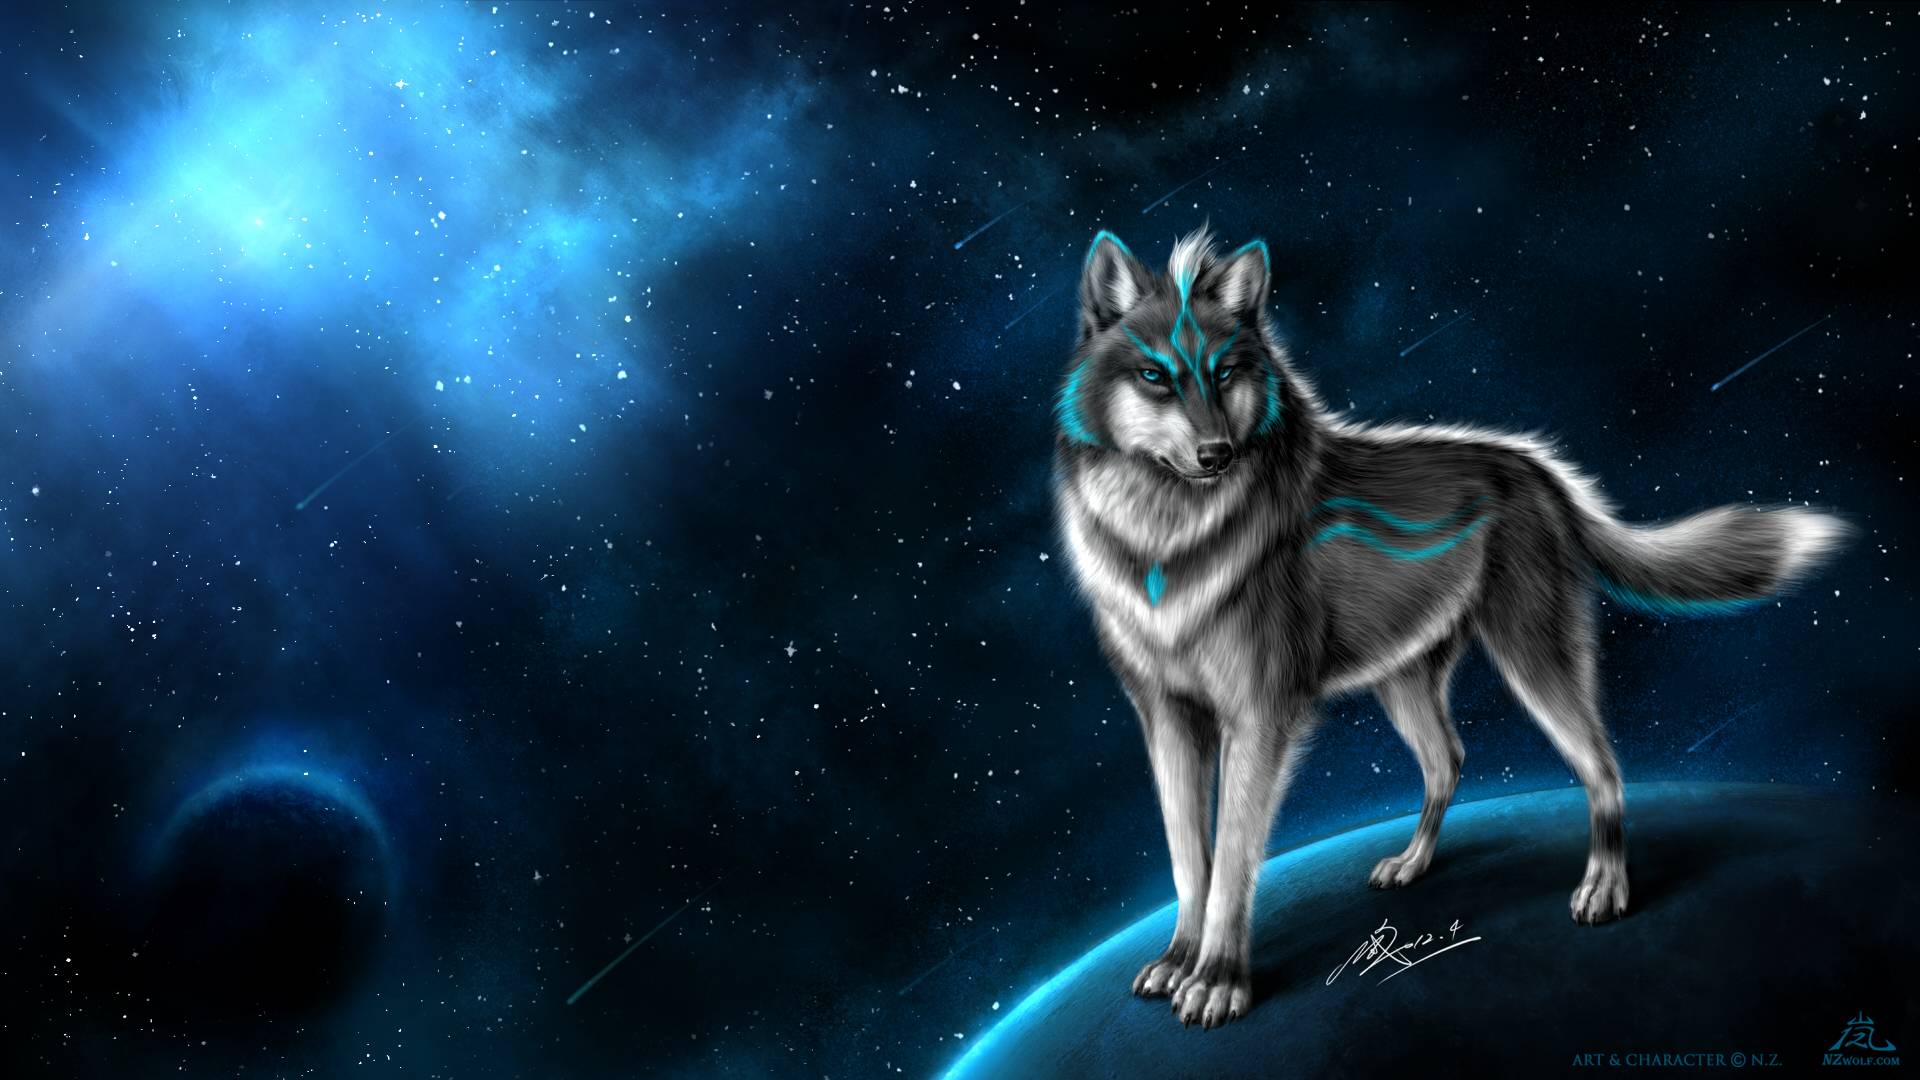 Wallpaper For > Fantasy Winged Wolf Wallpaper